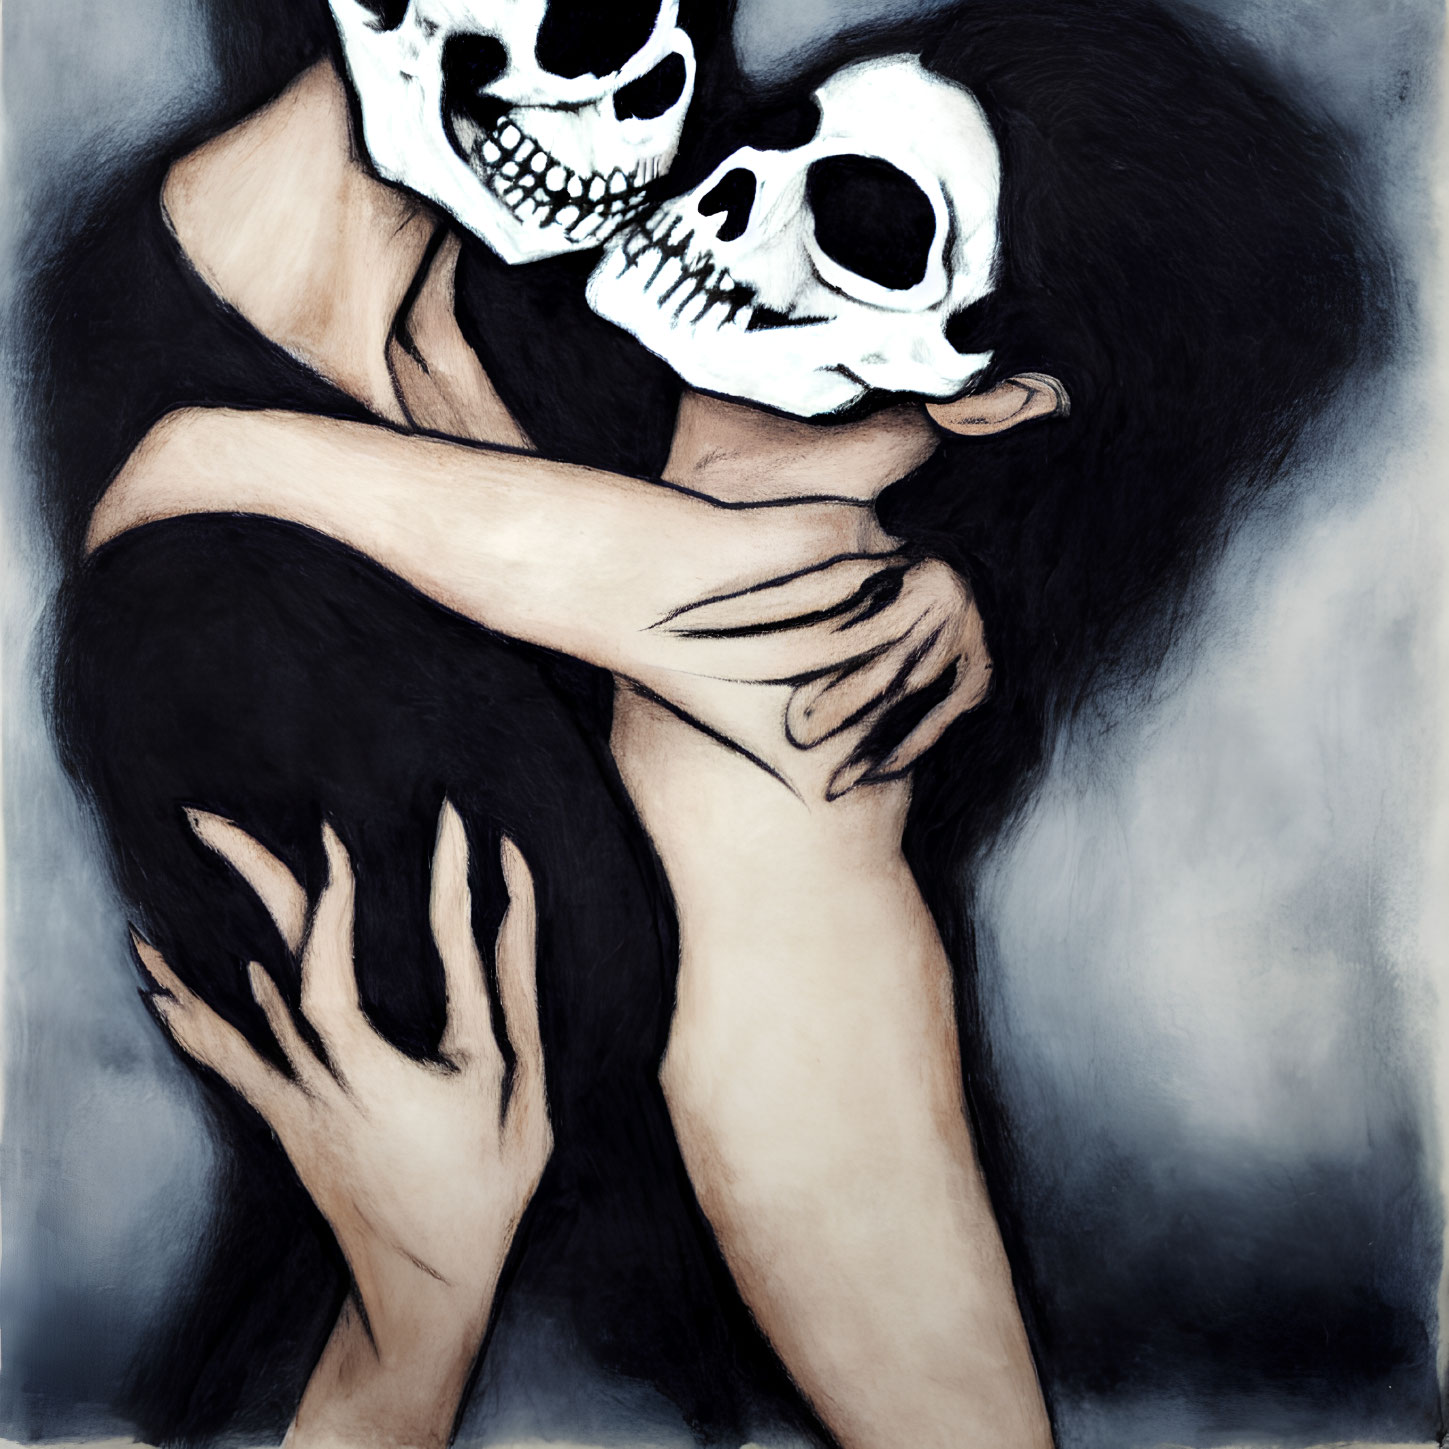 Skull-faced figures embrace with flowing hair and dramatic lighting.